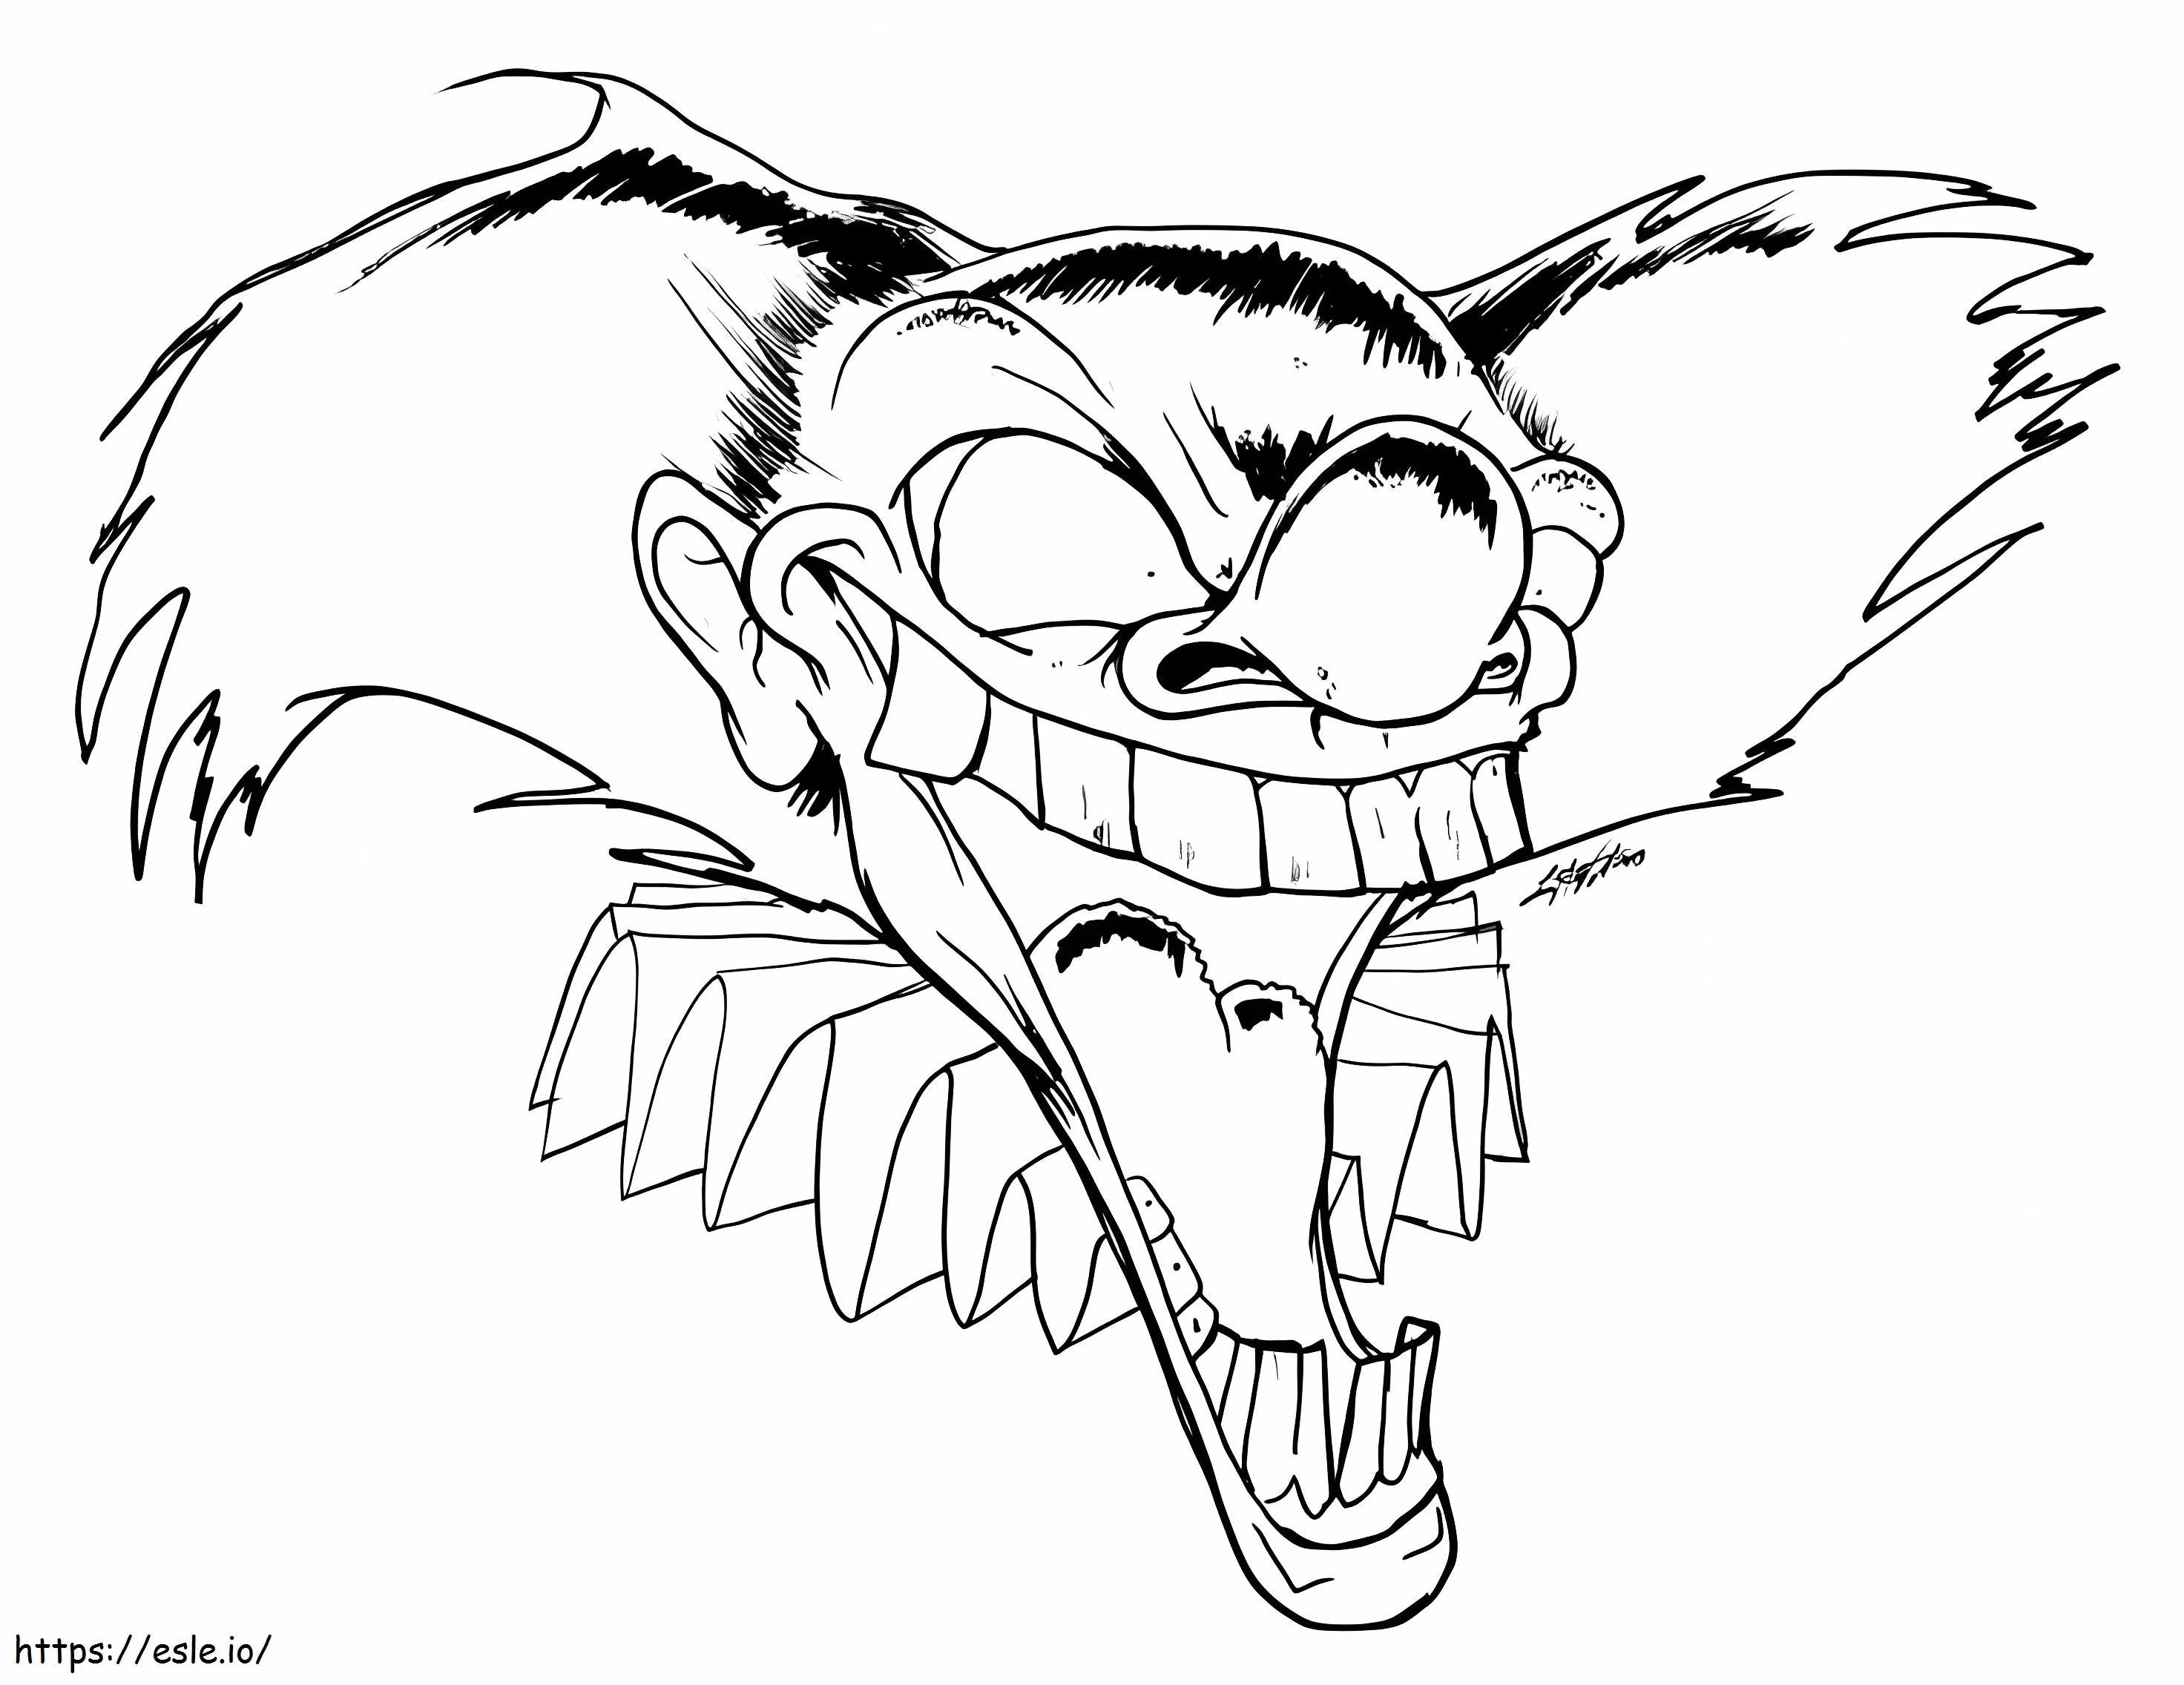 Scary Head Clown coloring page